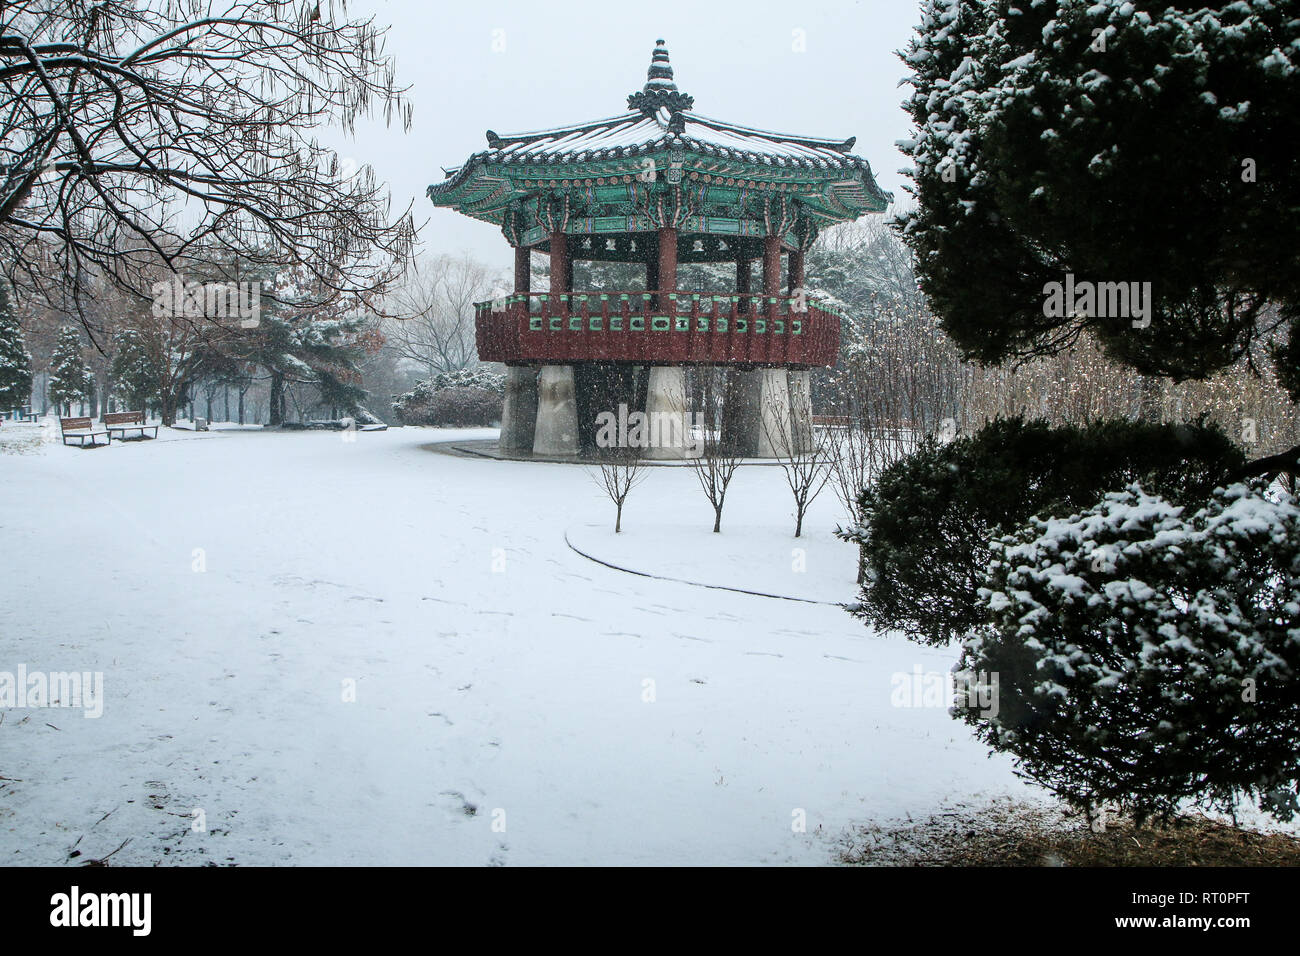 A Picture from the Yeouido park in Seoul in South Korea during the cold winter day and a snowfall. You can see one of the traditional wooden pavilions Stock Photo